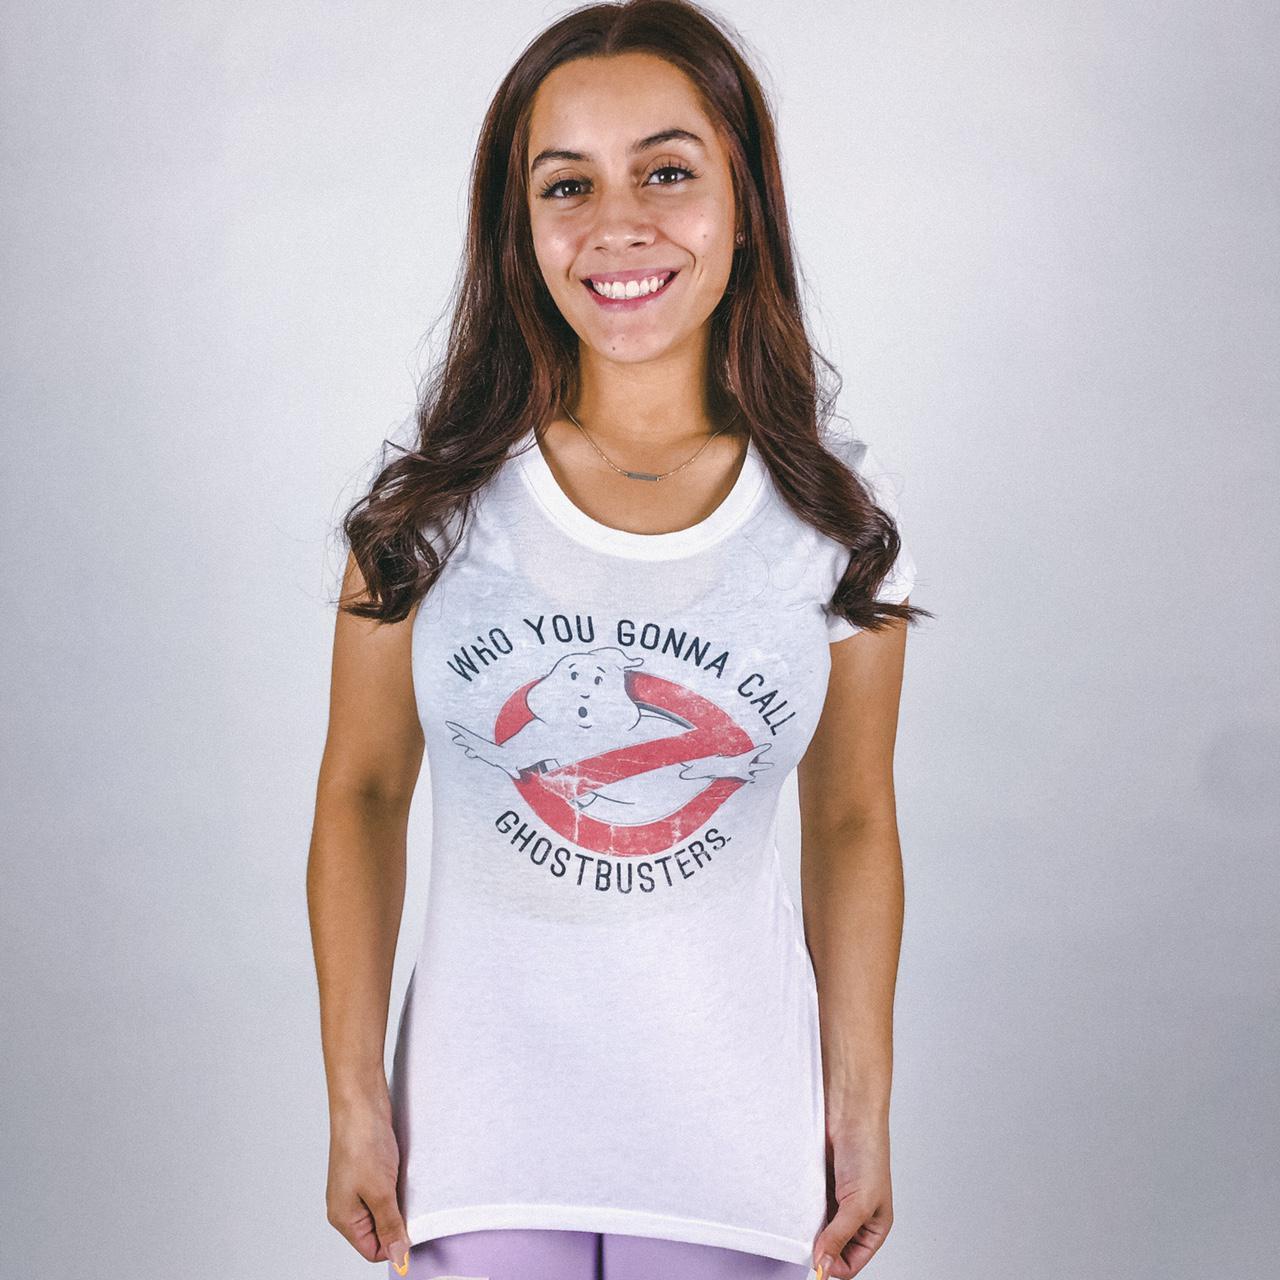 Product Image 1 - Ghostbusters Tee Size S
/
8/10
/
This shirt